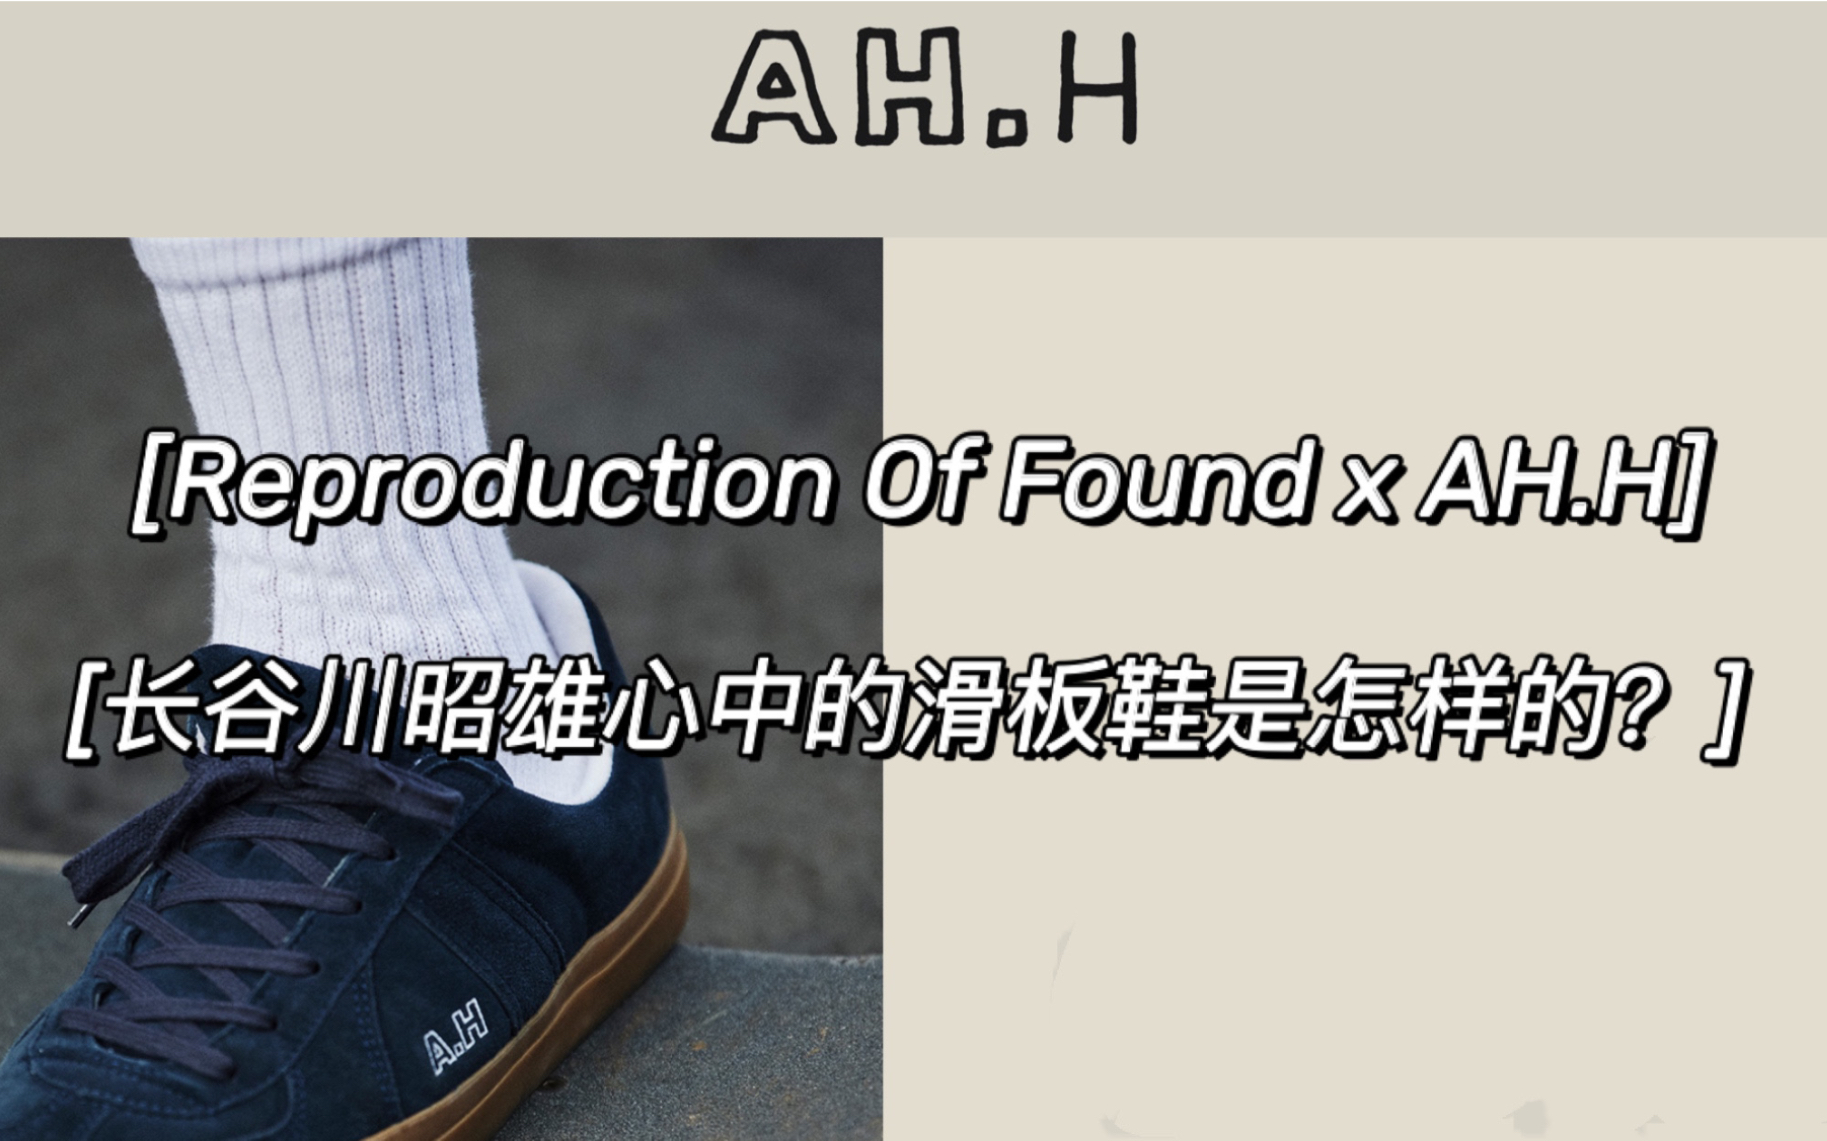 reproduction of found soushi 42 ah.h